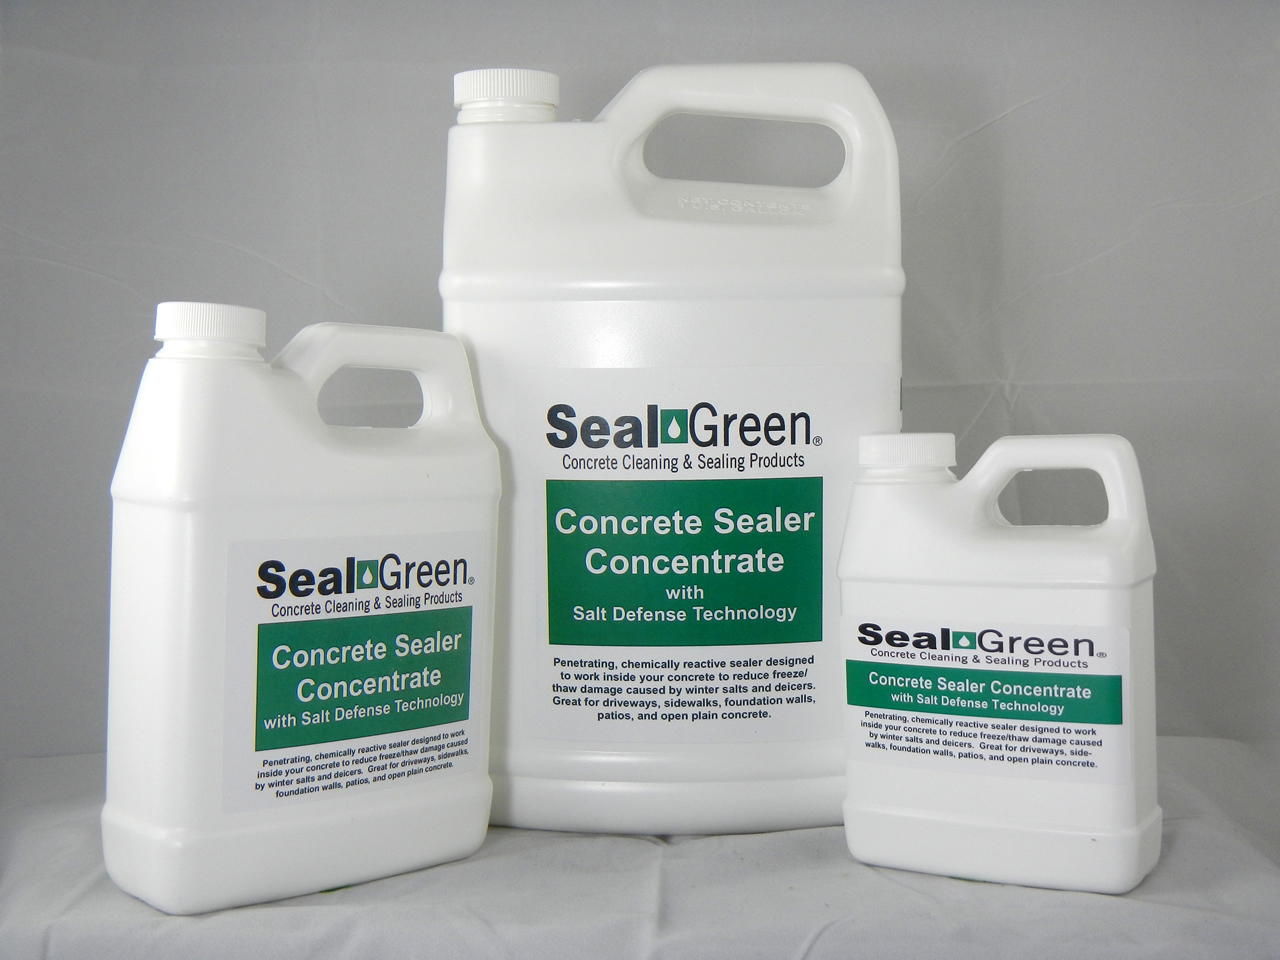 How long does it take seal green to dry on by driveway before I can drive my car into the garage? I saw where 12 ho